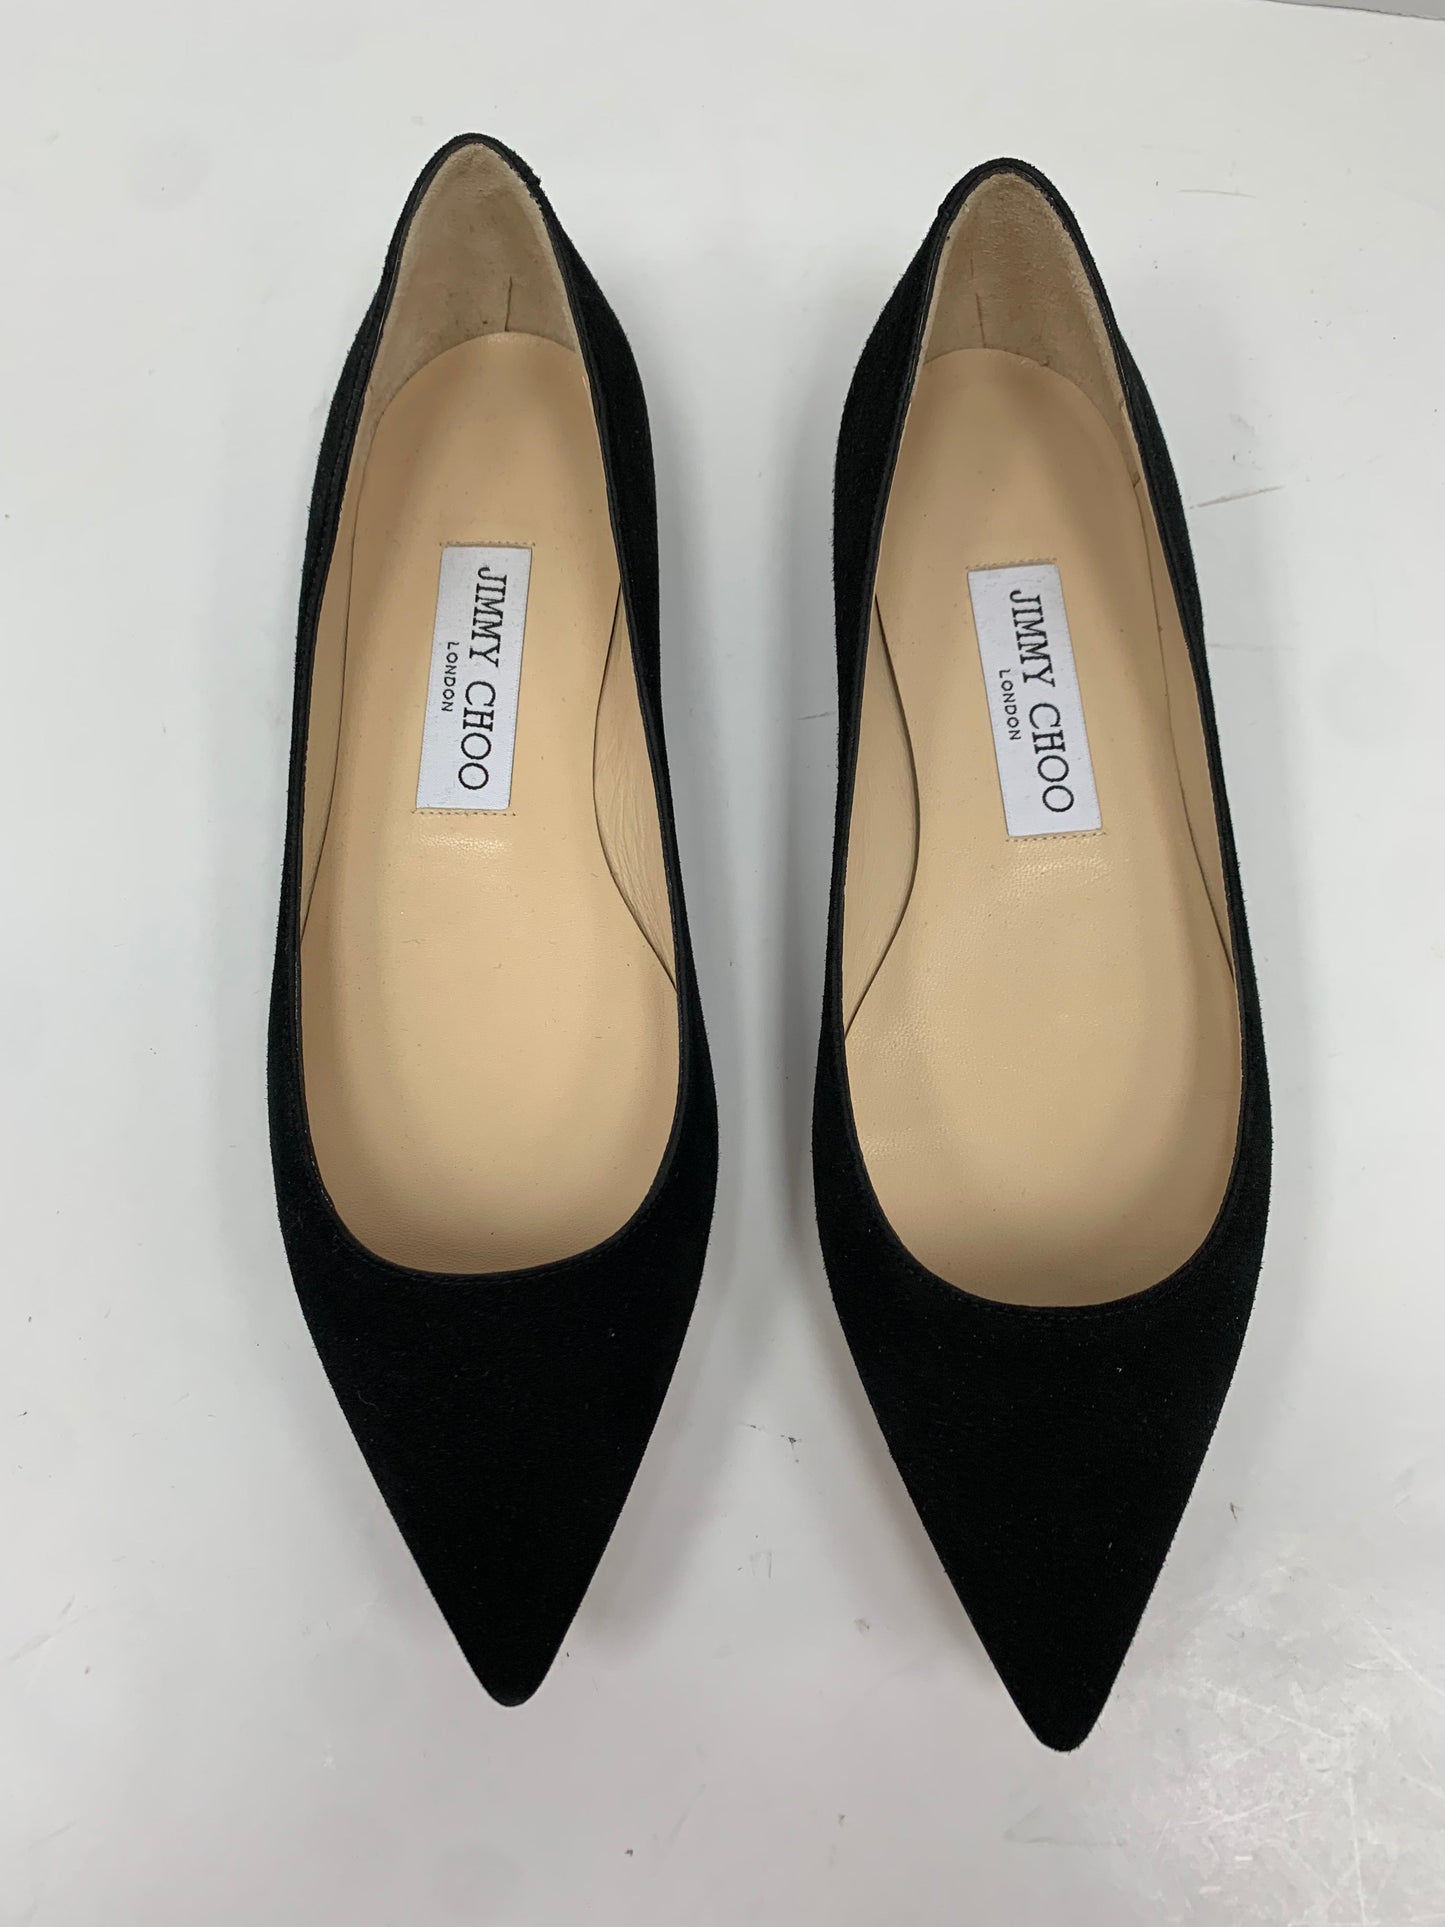 Shoes Luxury Designer By Jimmy Choo  Size: 6.5